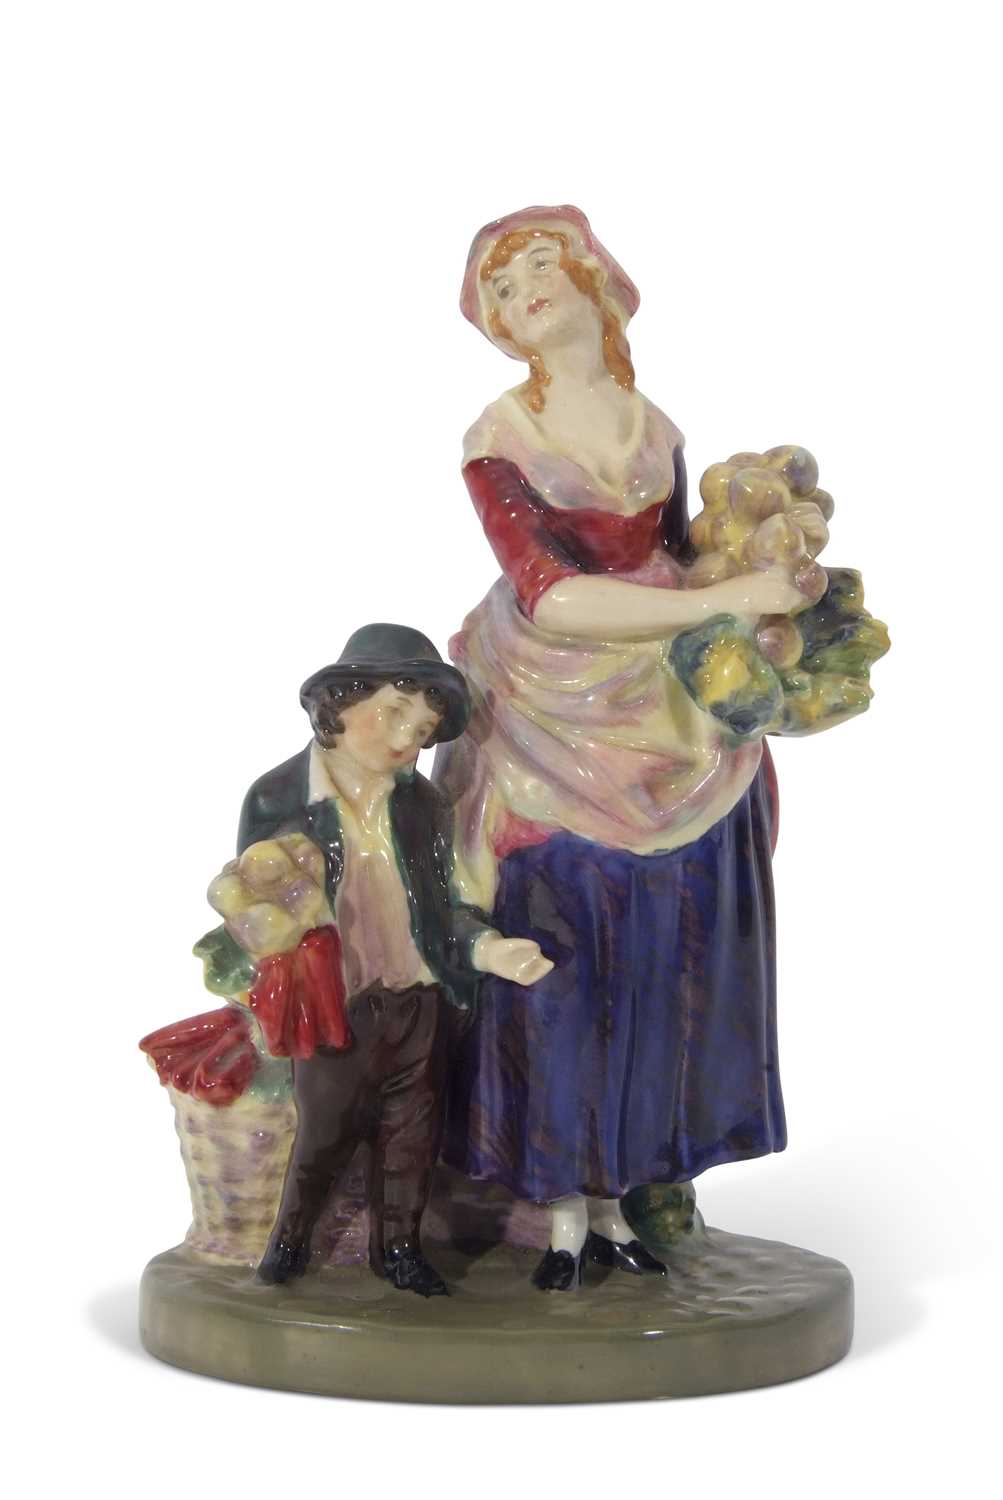 Royal Doulton London Cry Figure HN752 impressed dated 1927 with factory mark and "potted by